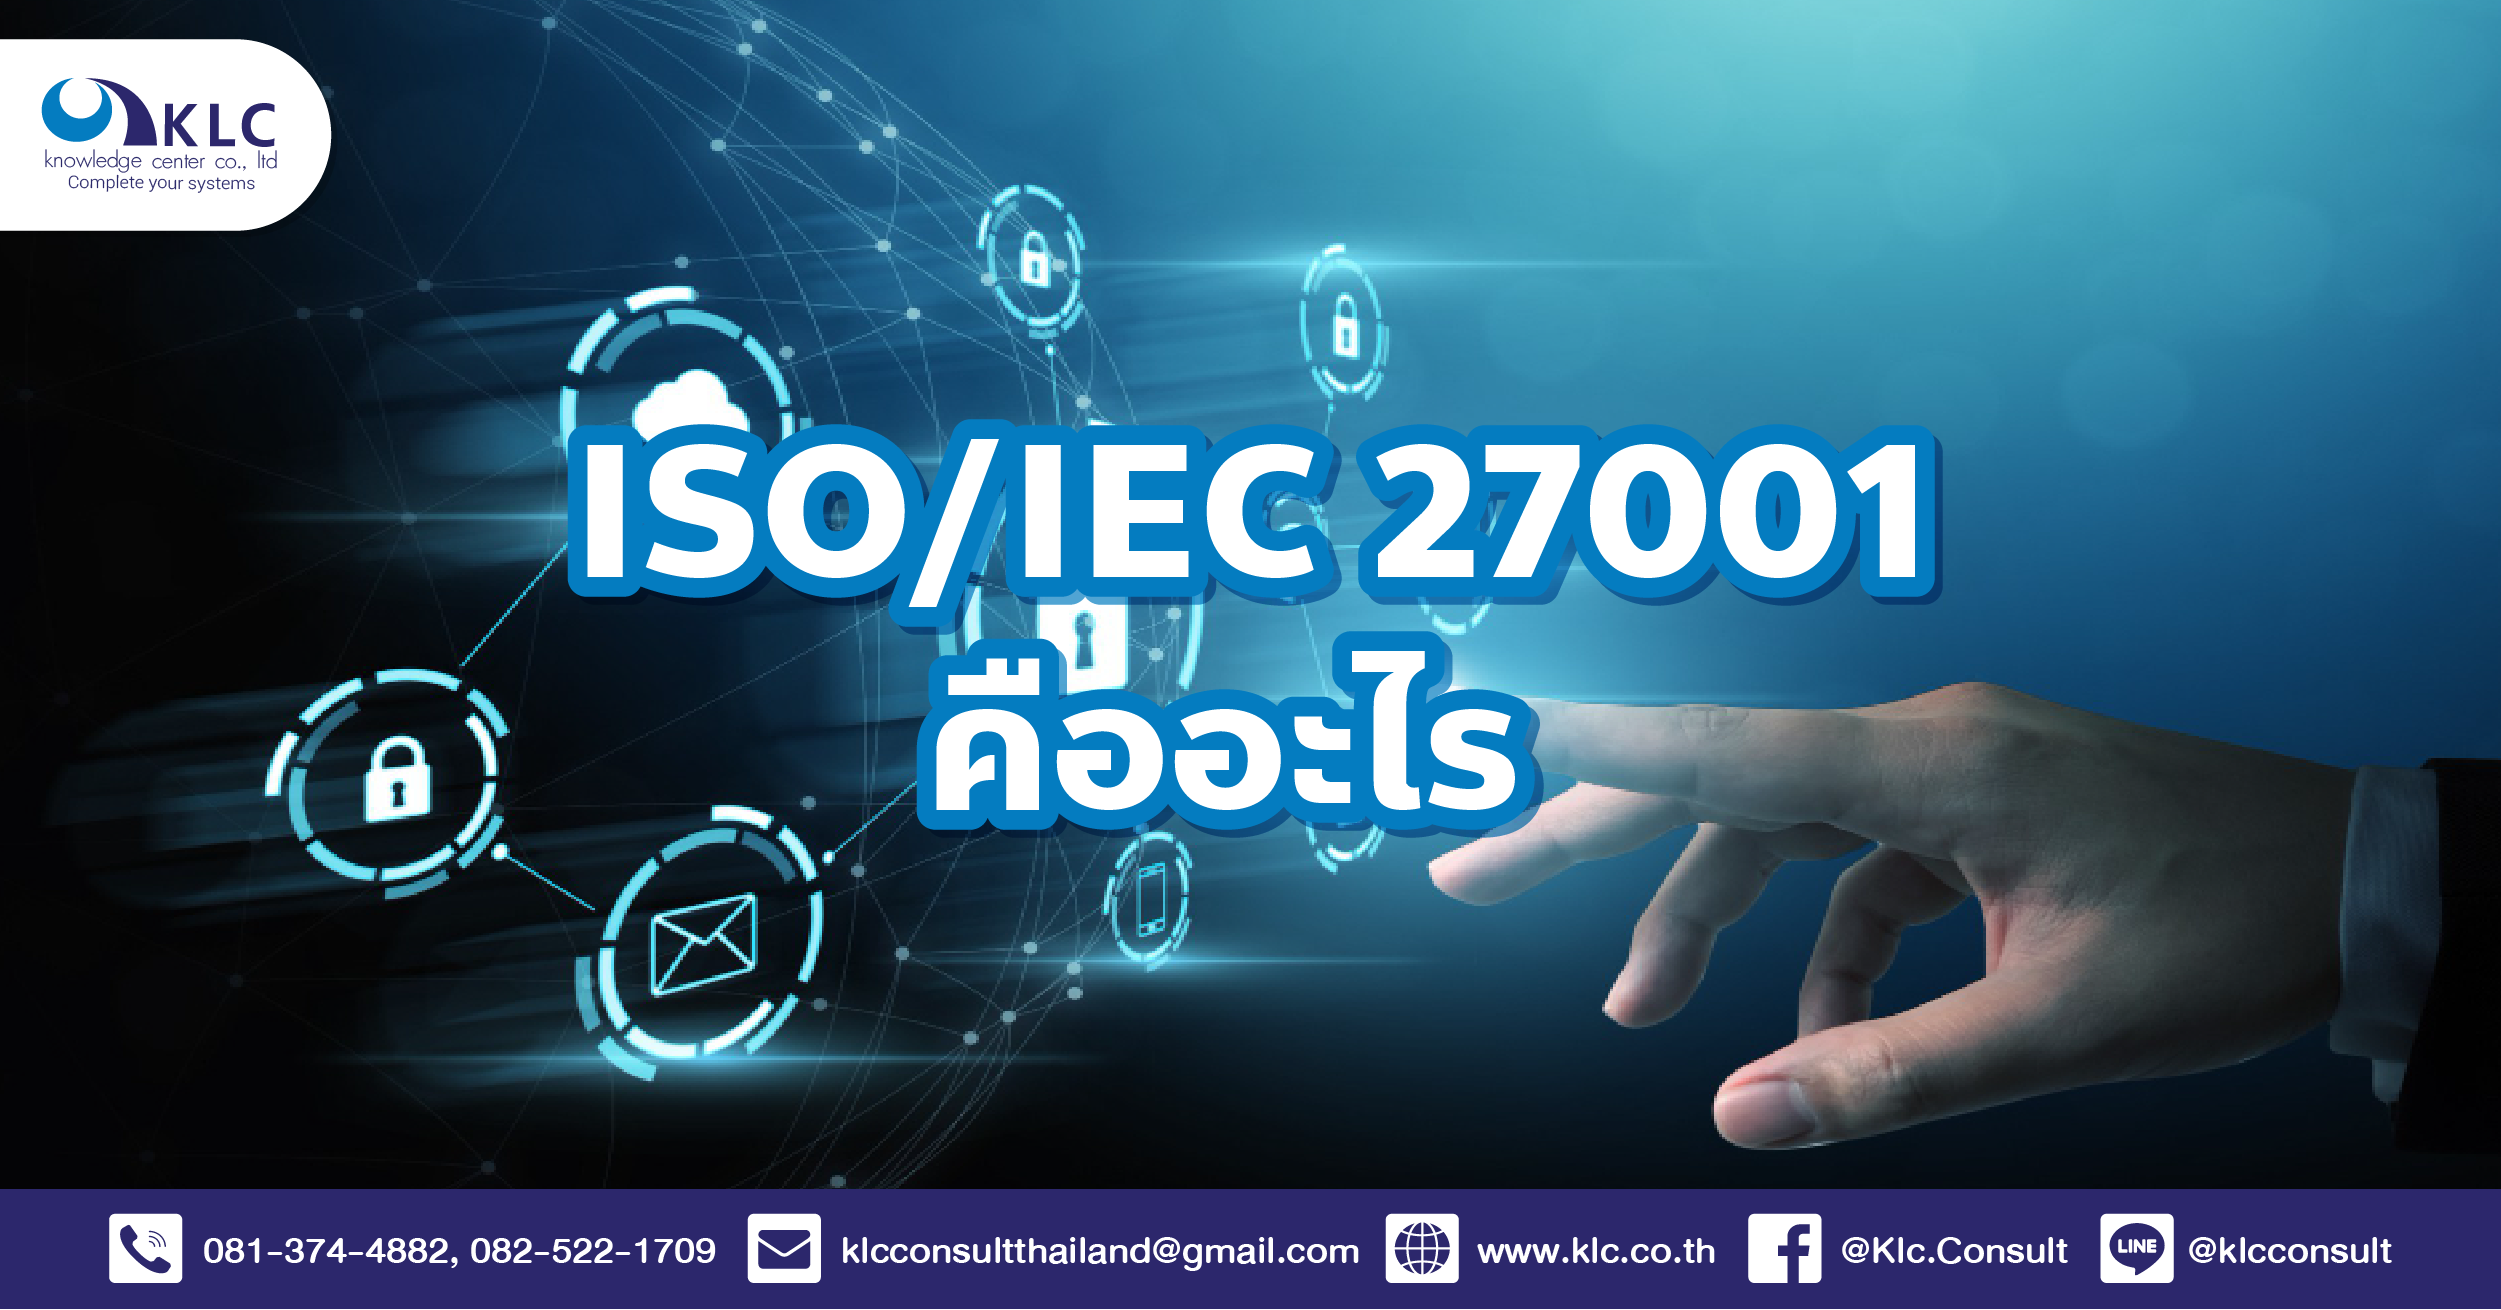 036_What is ISOIEC 27001